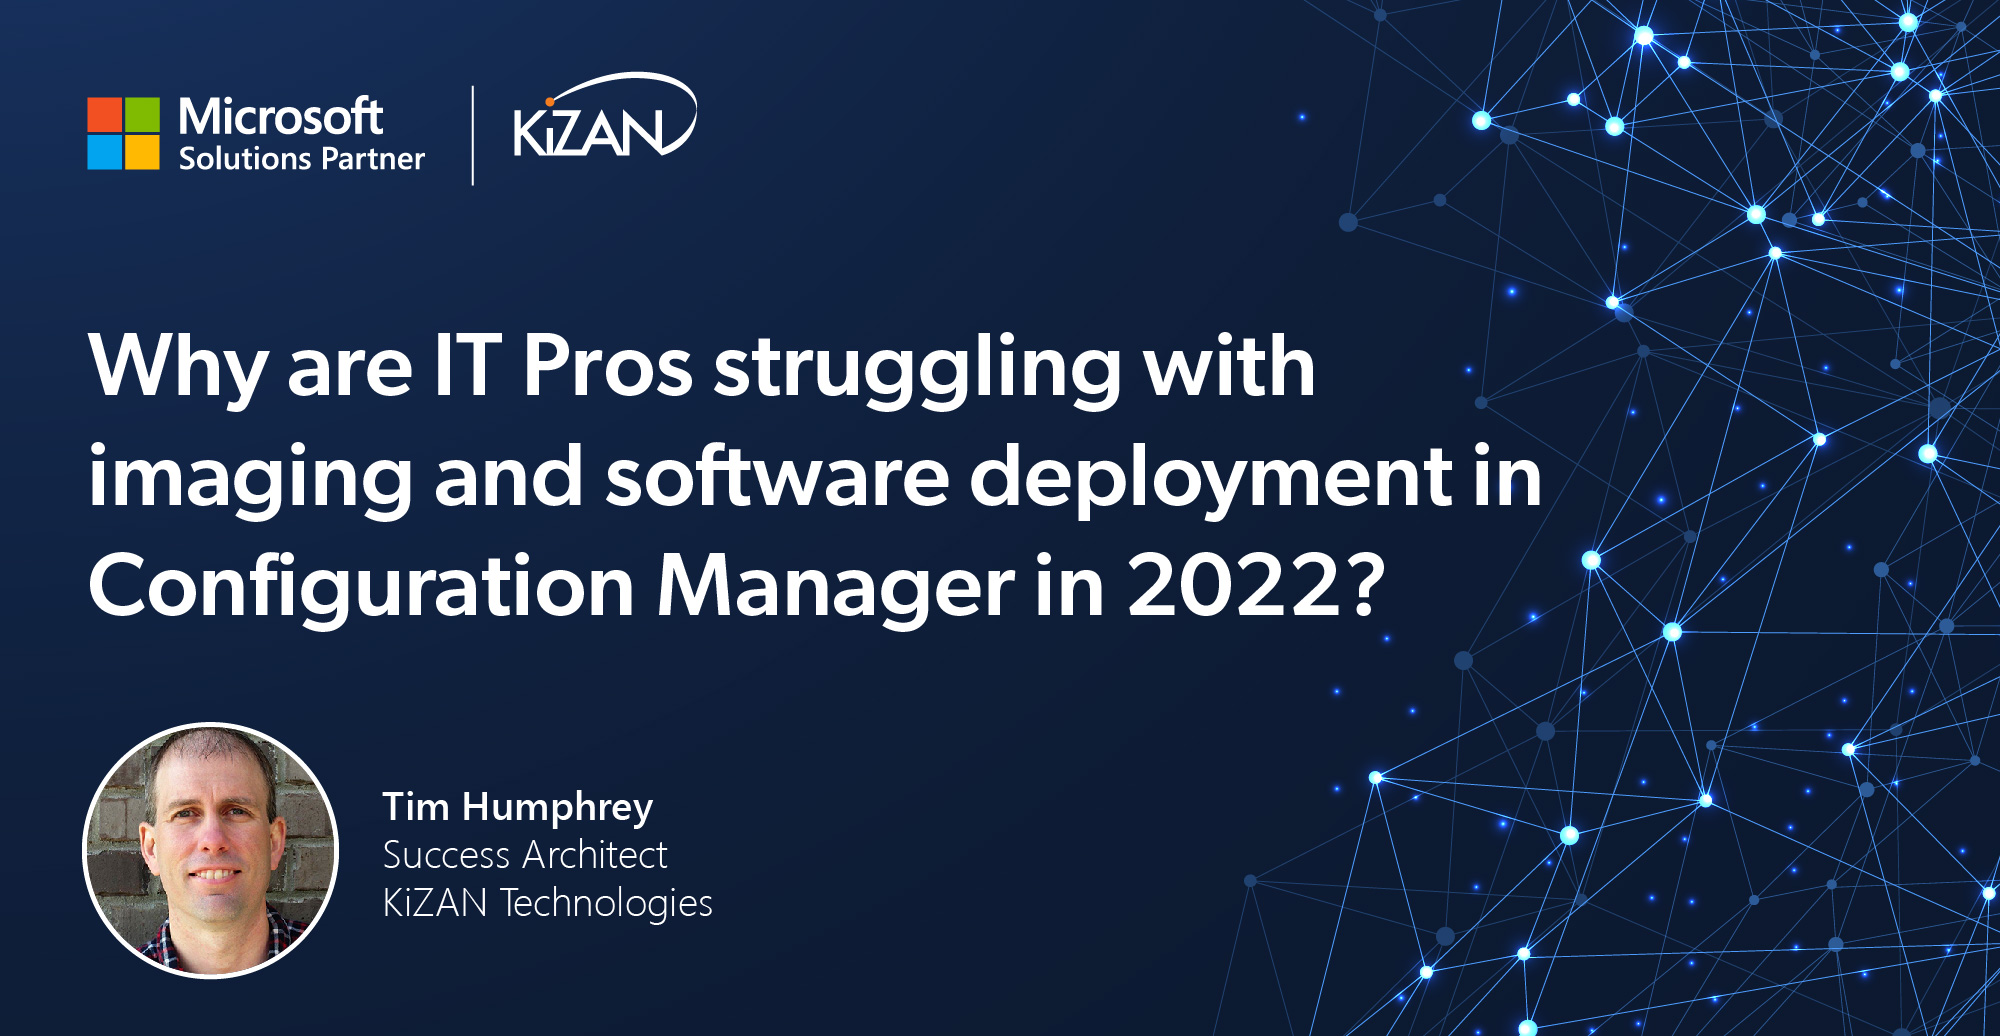 Why are IT Pros struggling with imaging and software deployment in Configuration Manager in 2022?